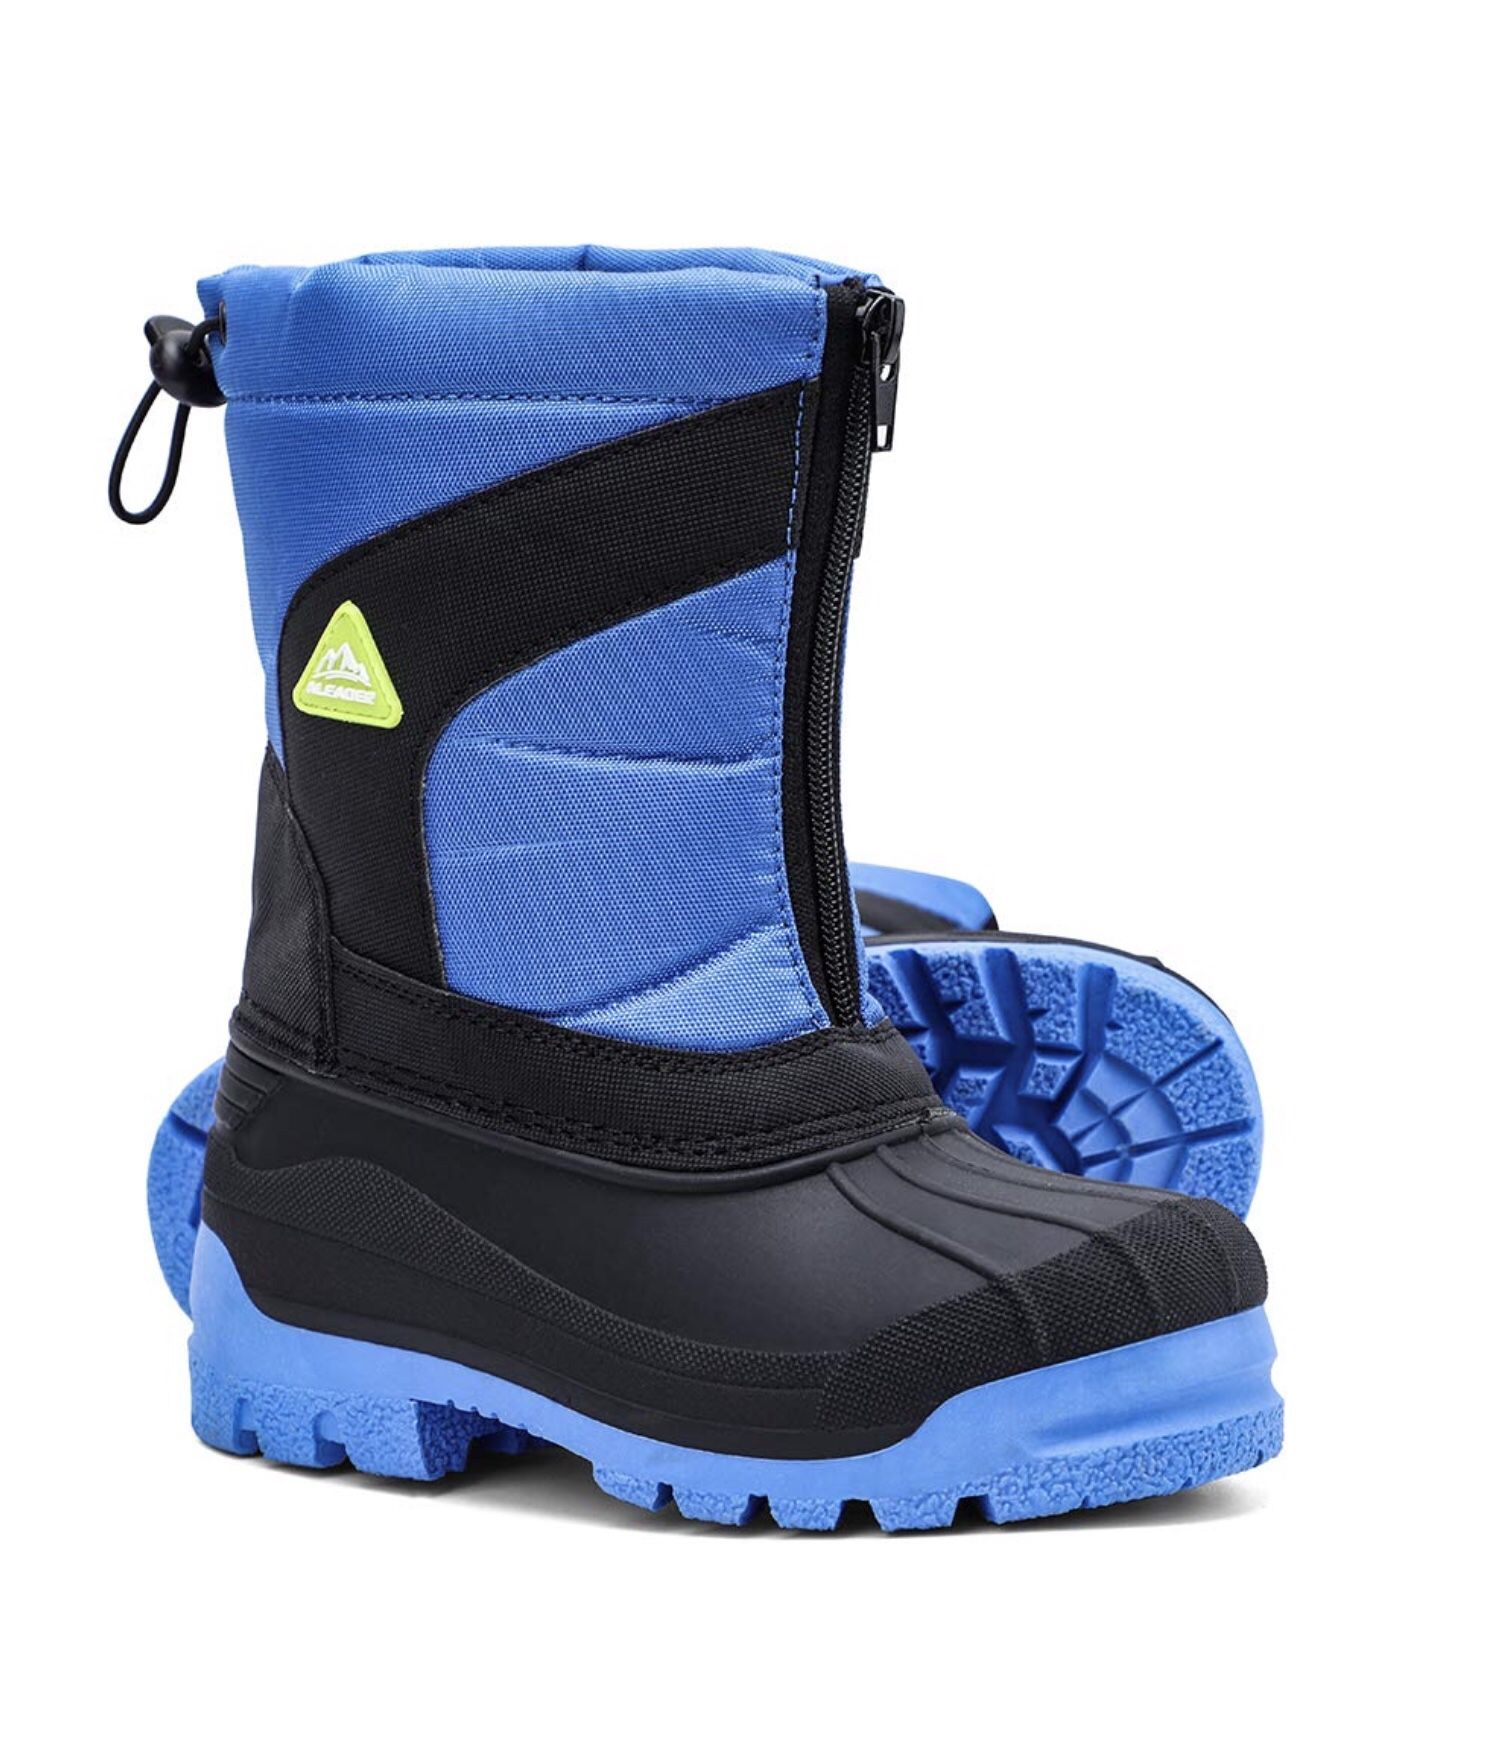 ALEADER - Boys/Girls Insulated Waterproof Cold Weather Snow Boots - 5A